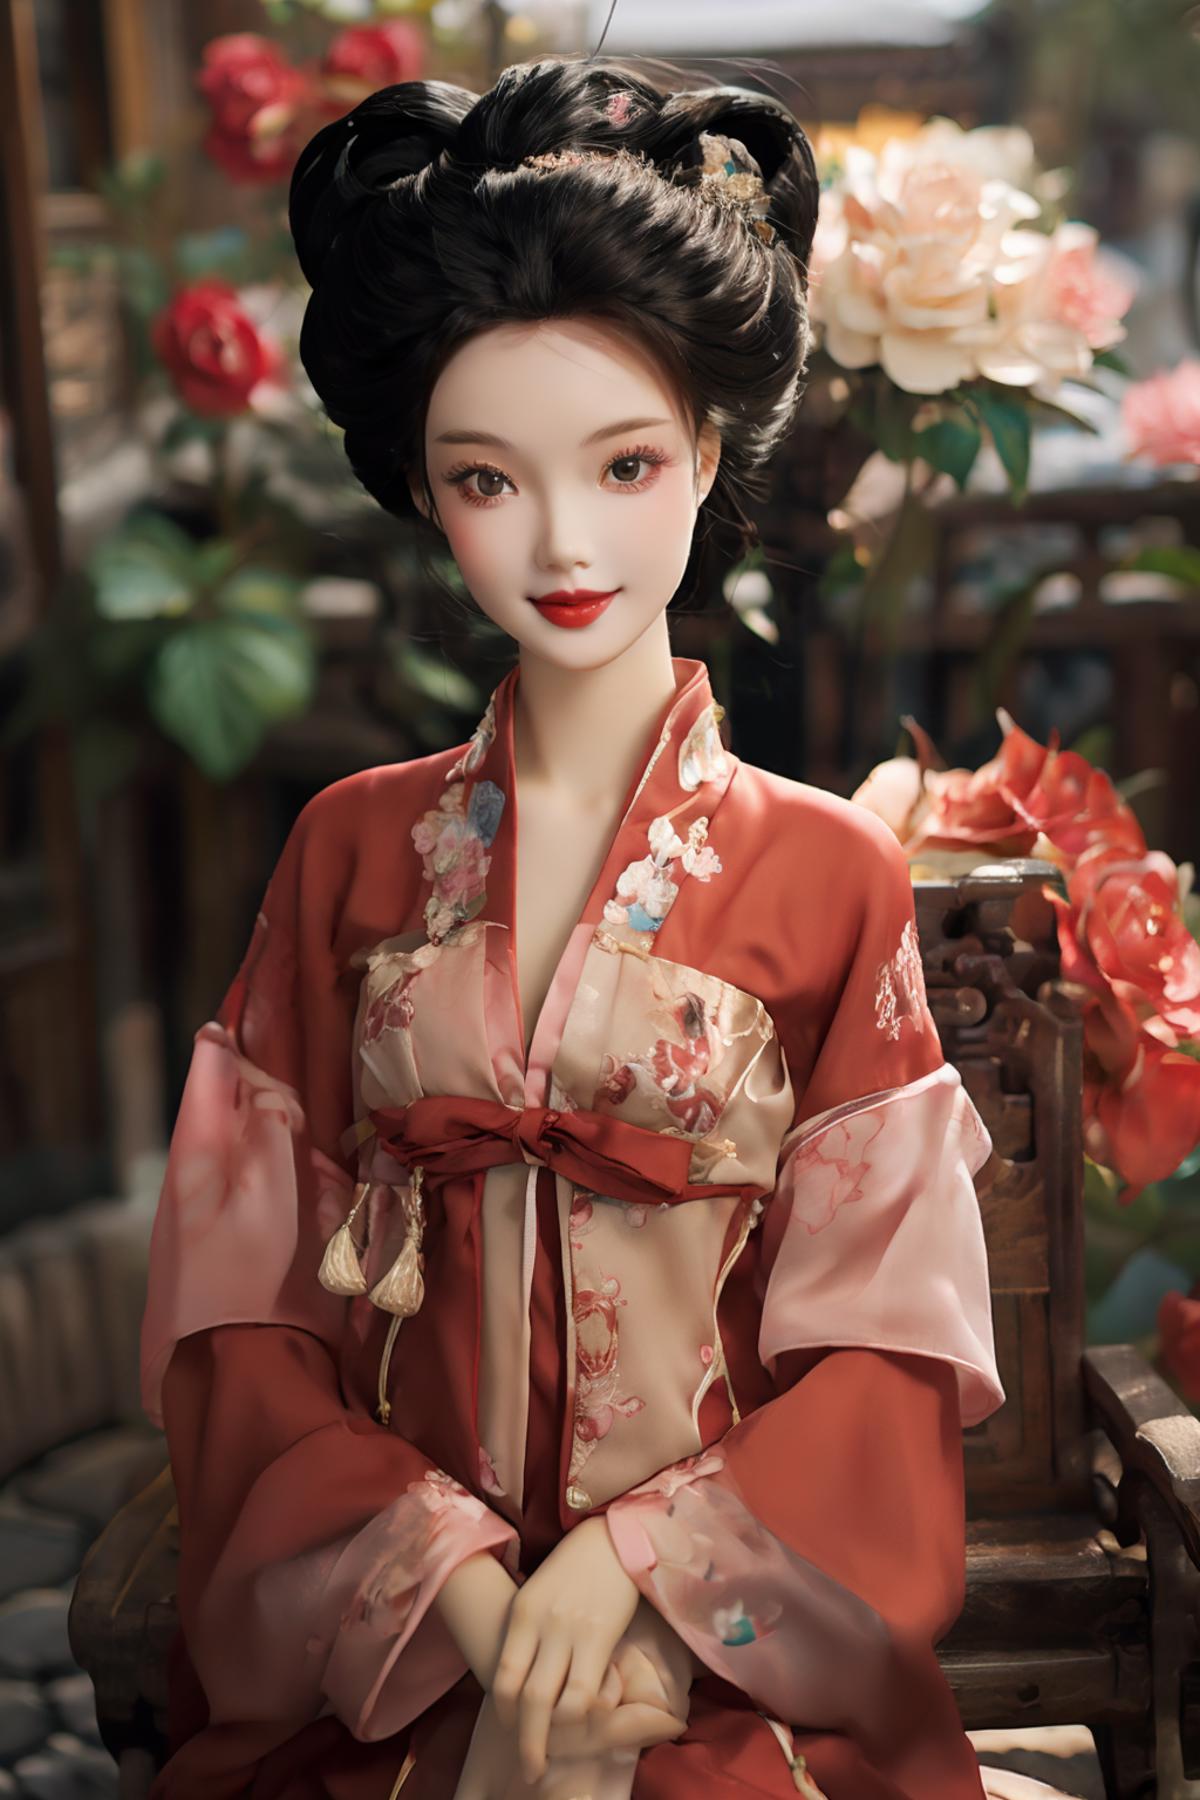 Barbie in Chinese Clothes | 国风芭比 image by Fridaynight